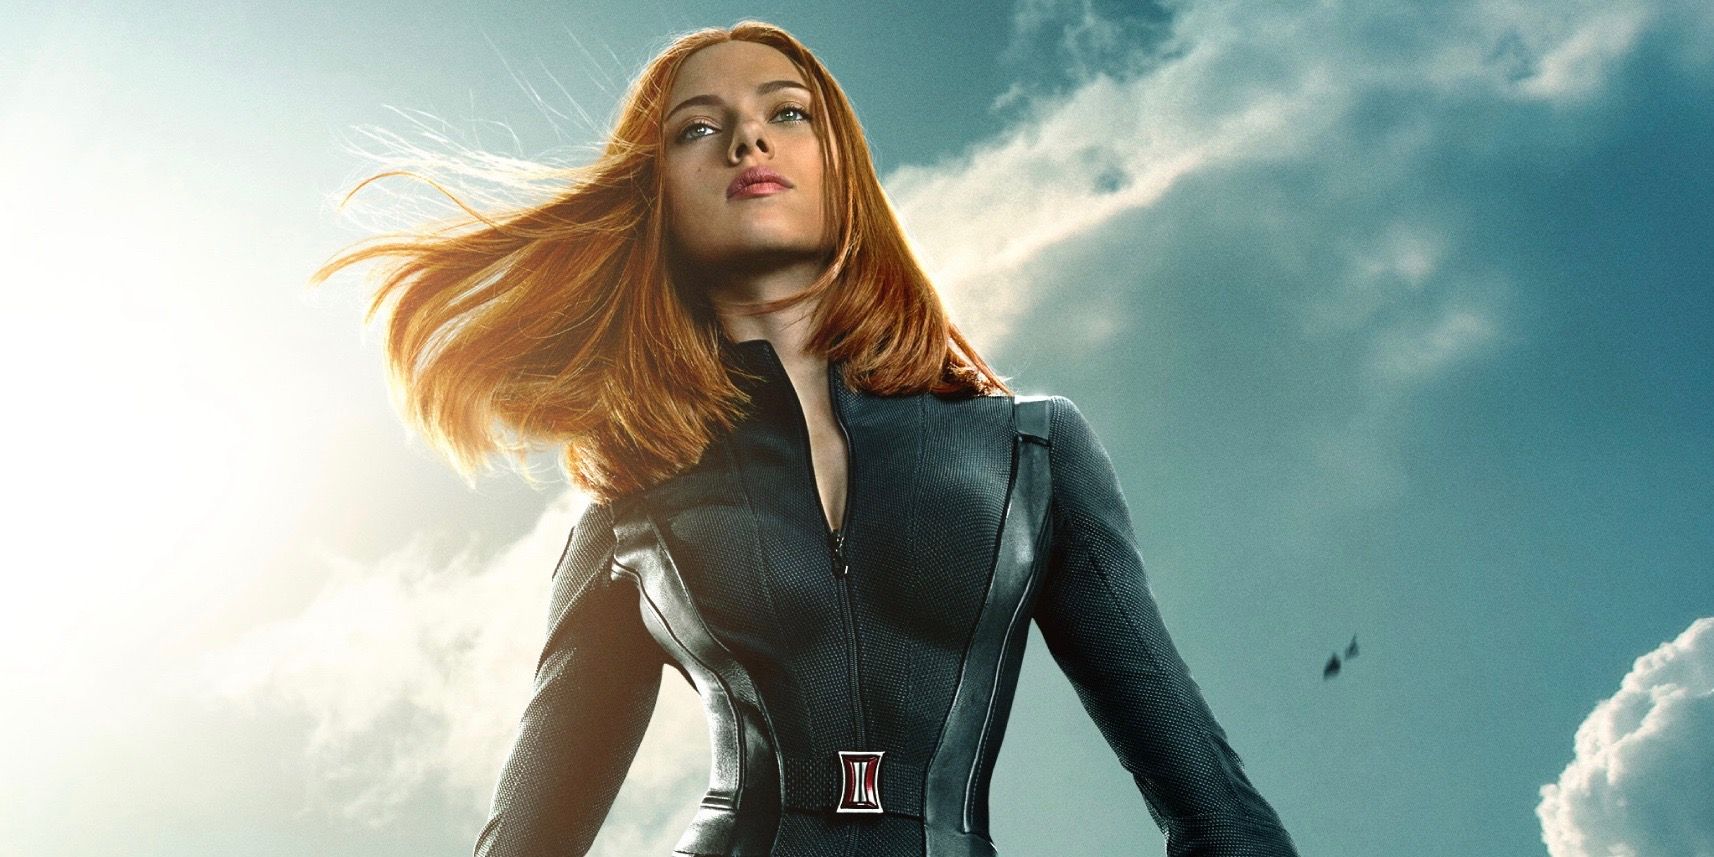 Scarlett Johansson as Black Widow in Captain America The Winter Soldier Cropped Poster